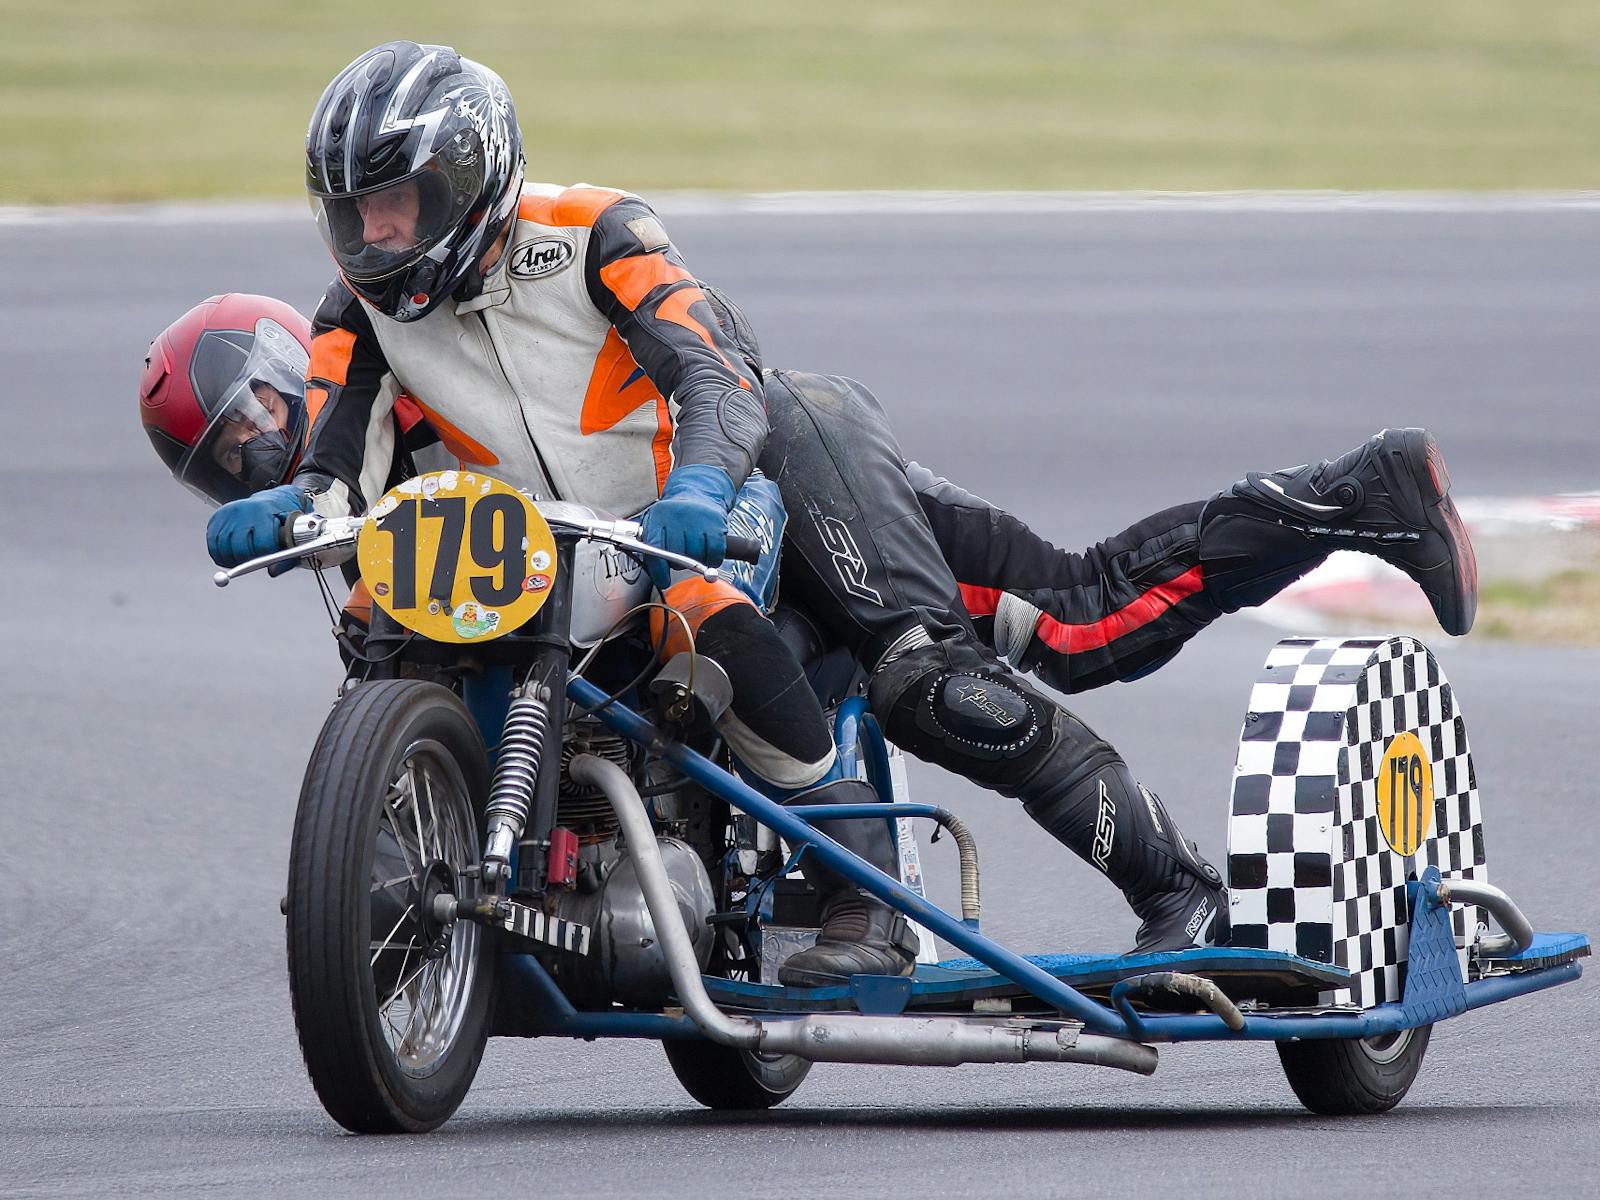 See it all - cars, sidecars and motorcycle races!